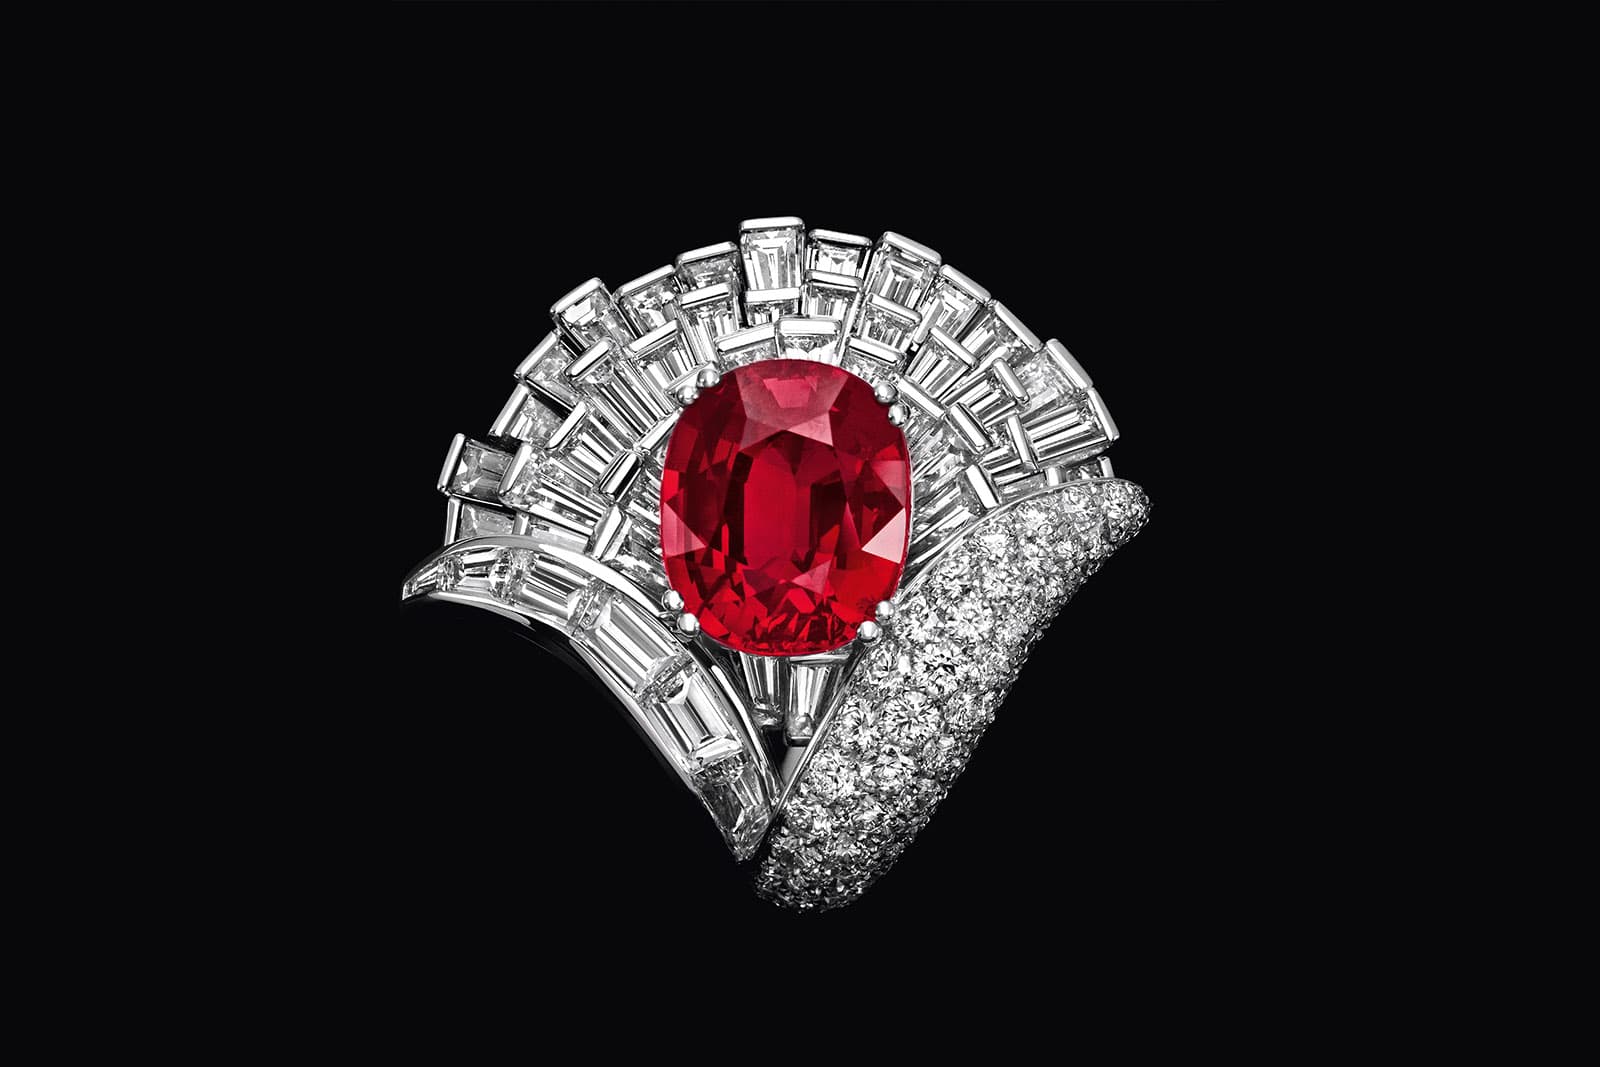 Picchiotti 'L'Anfiteatro' ring with ruby and diamonds in white gold